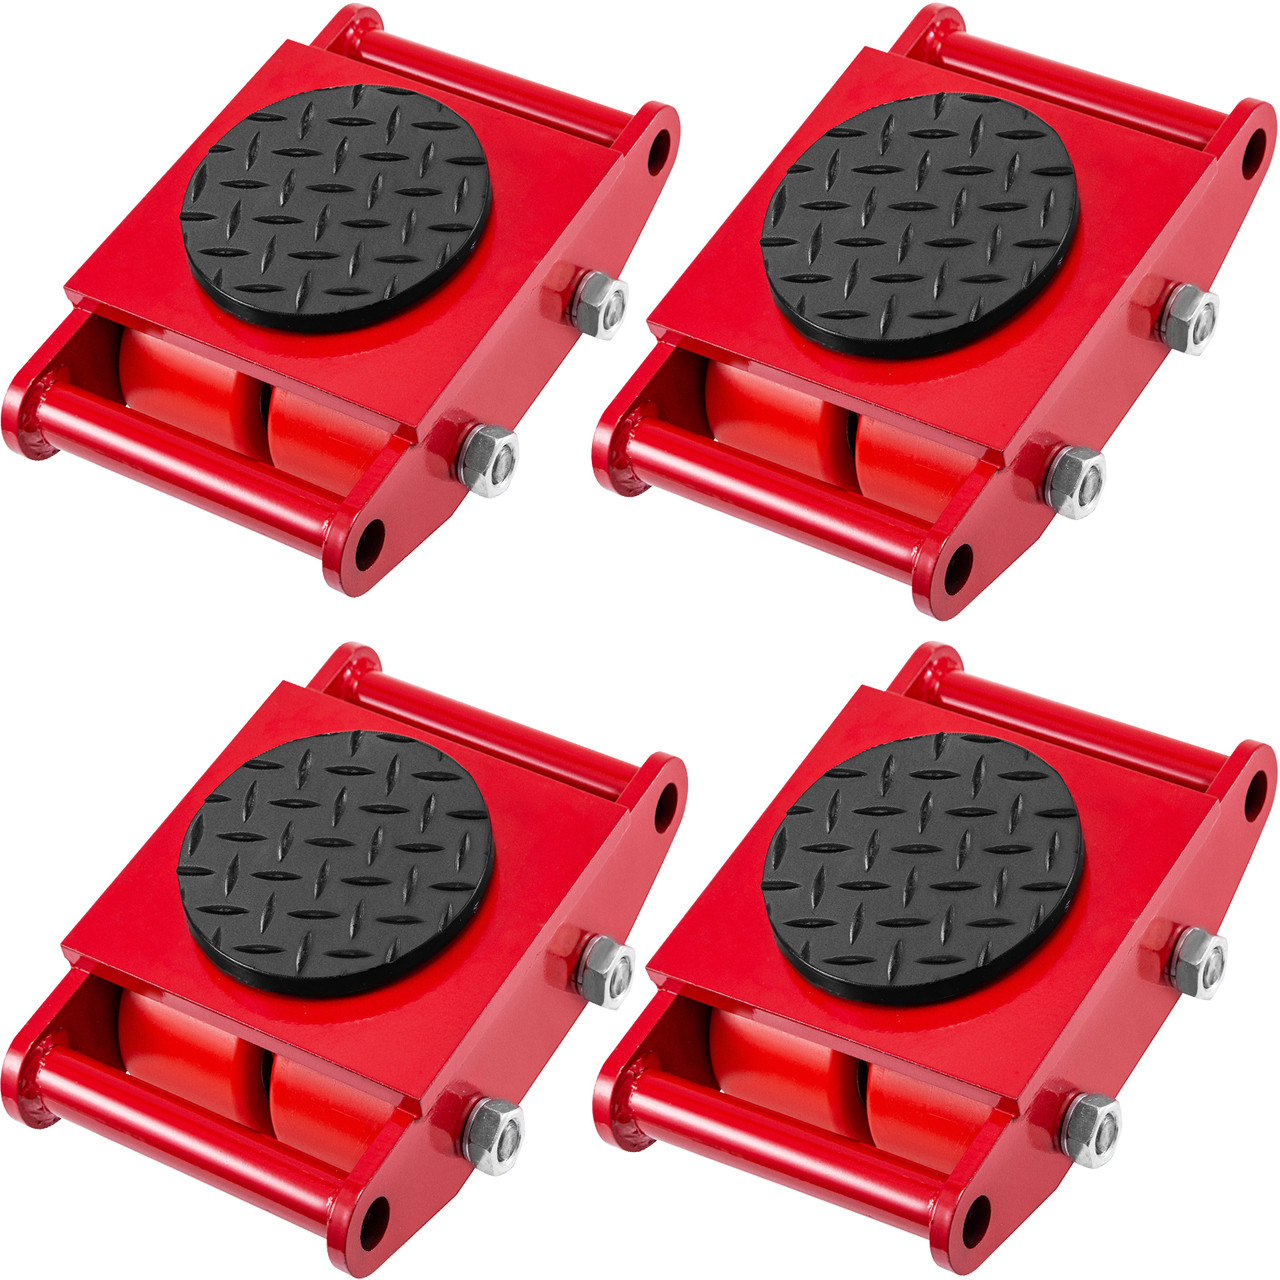 4pcs Machinery Mover, 6T Machinery Skate Dolly, 13200lbs Machinery Moving Skate, Machinery Mover Skate w/ 360ø Rotation Cap and 4 Rollers, Heavy Duty Industrial Moving Equipment, Red